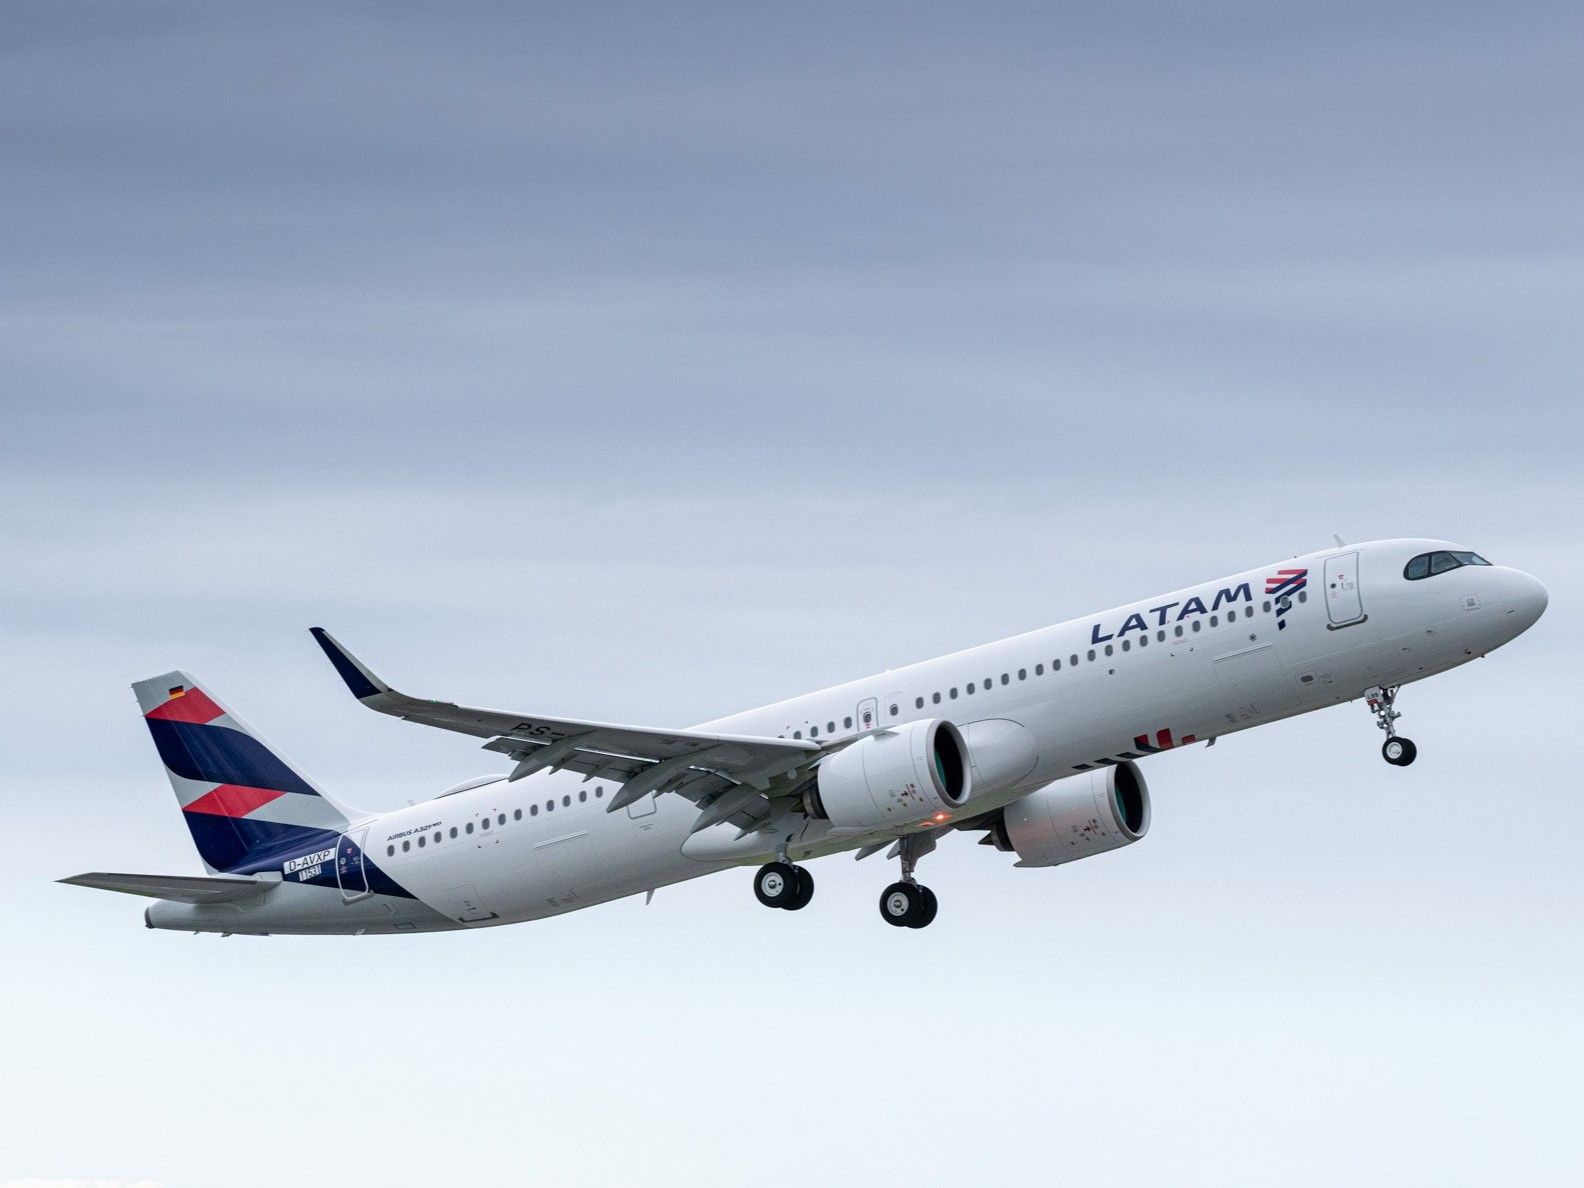 latam-a321neo - 4x3 - First A321neo for LATAM taking off